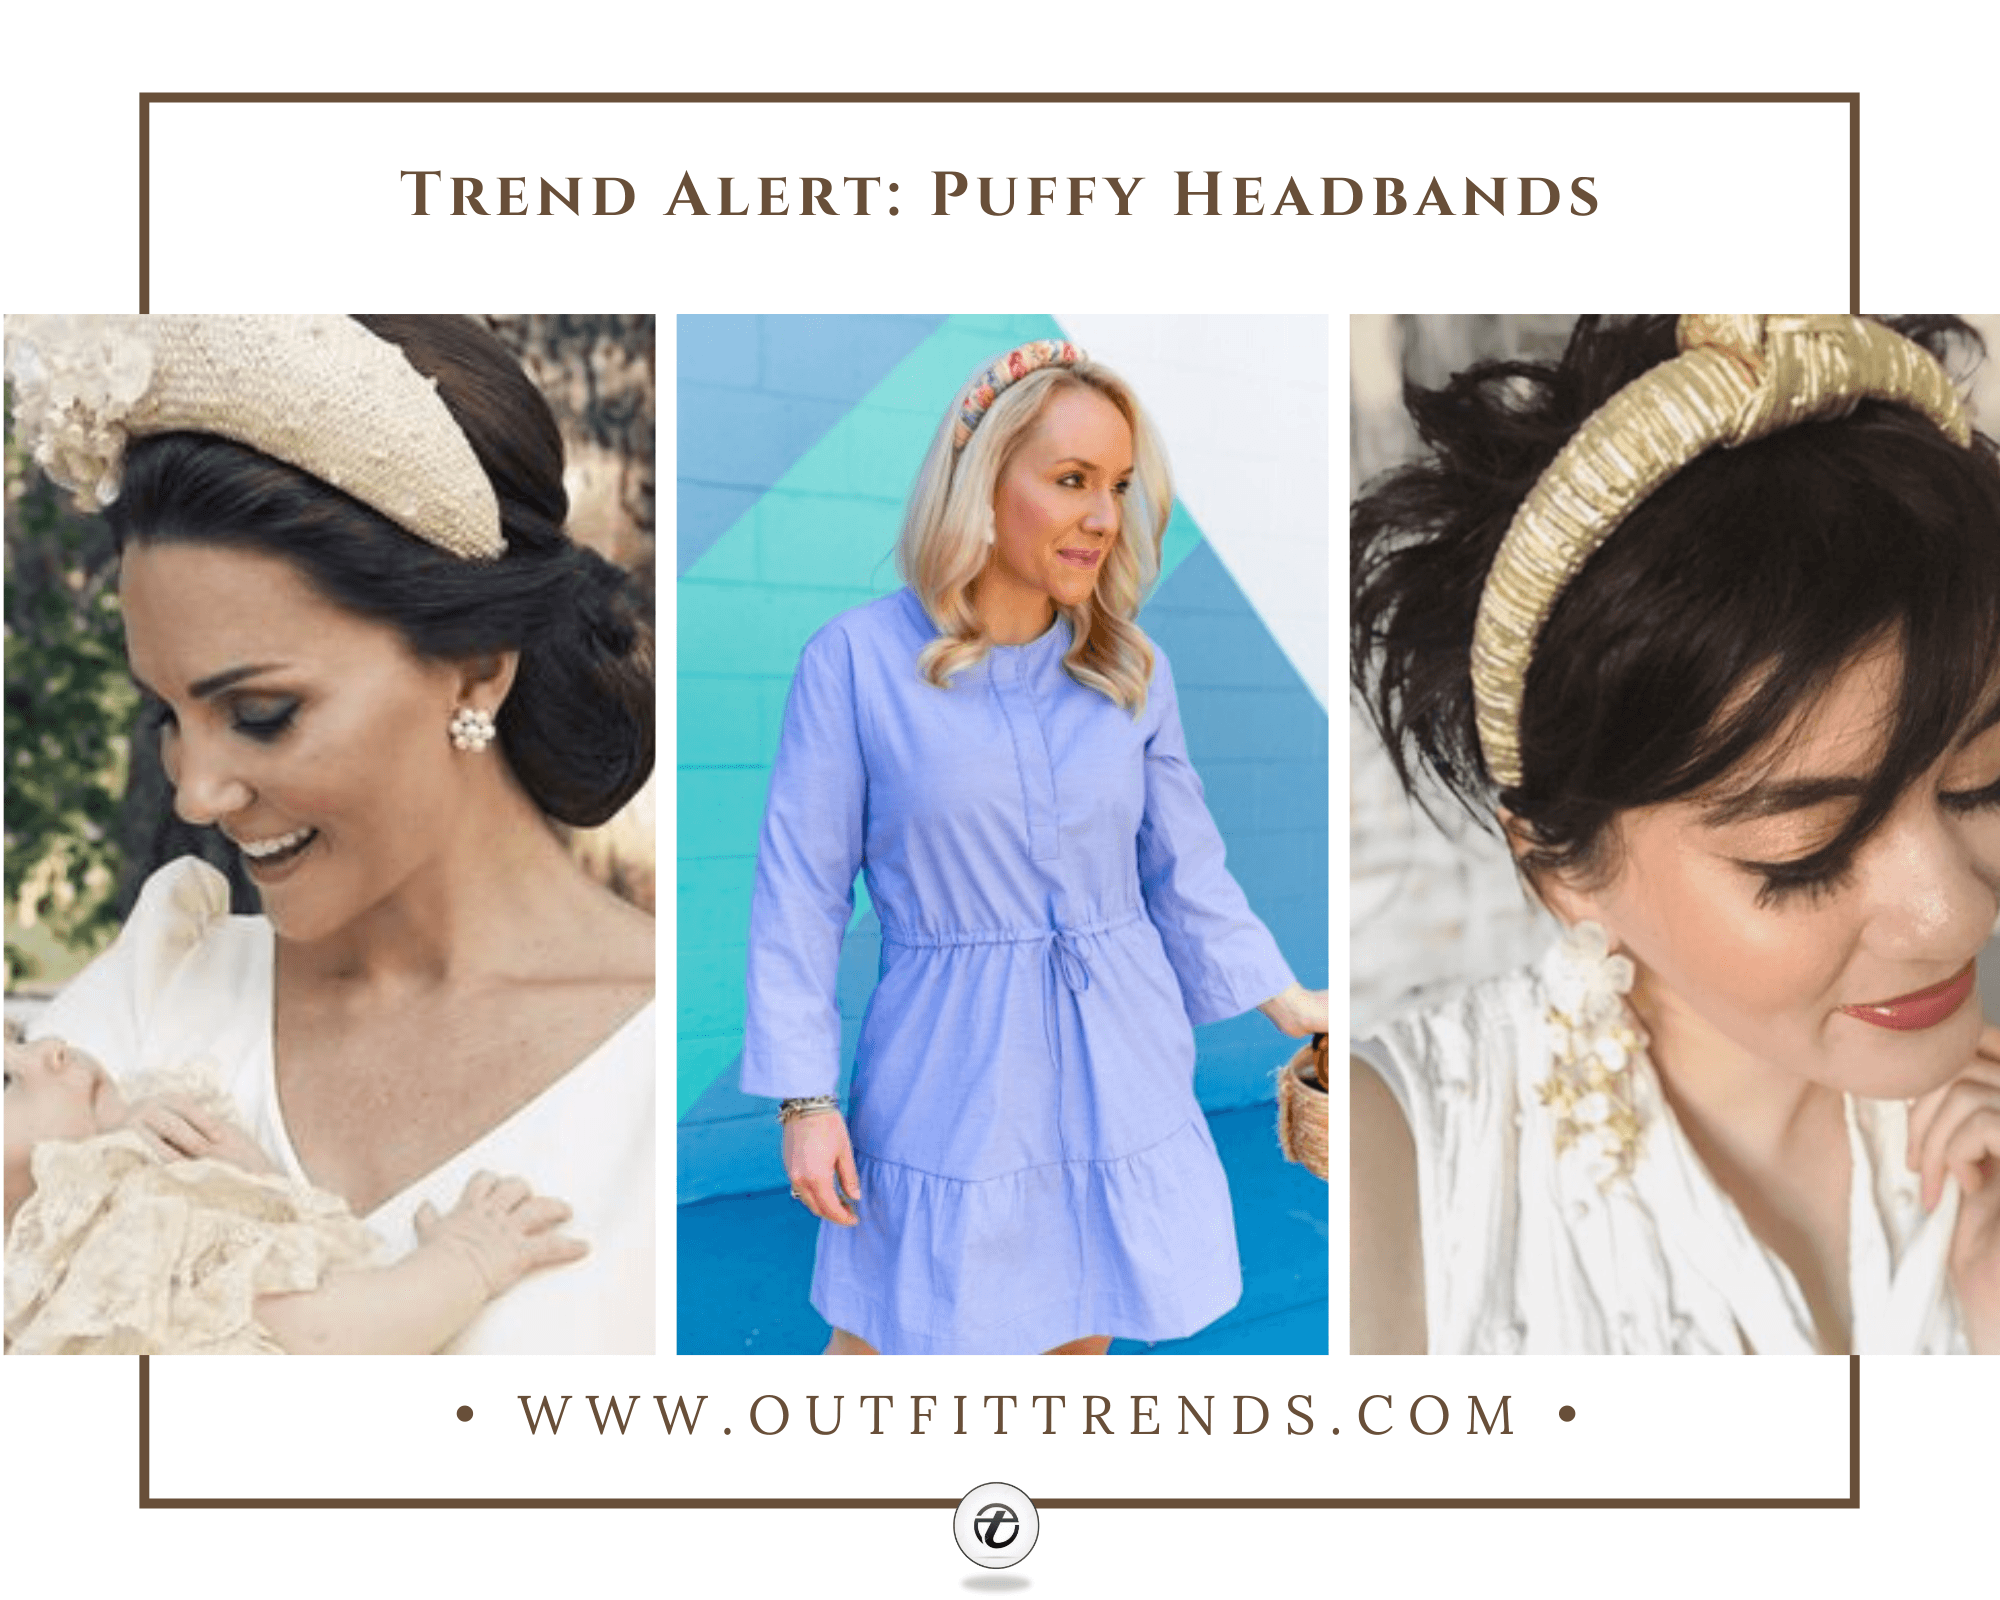 11 Easy Headband Hairstyles That Look So Chic | Who What Wear UK